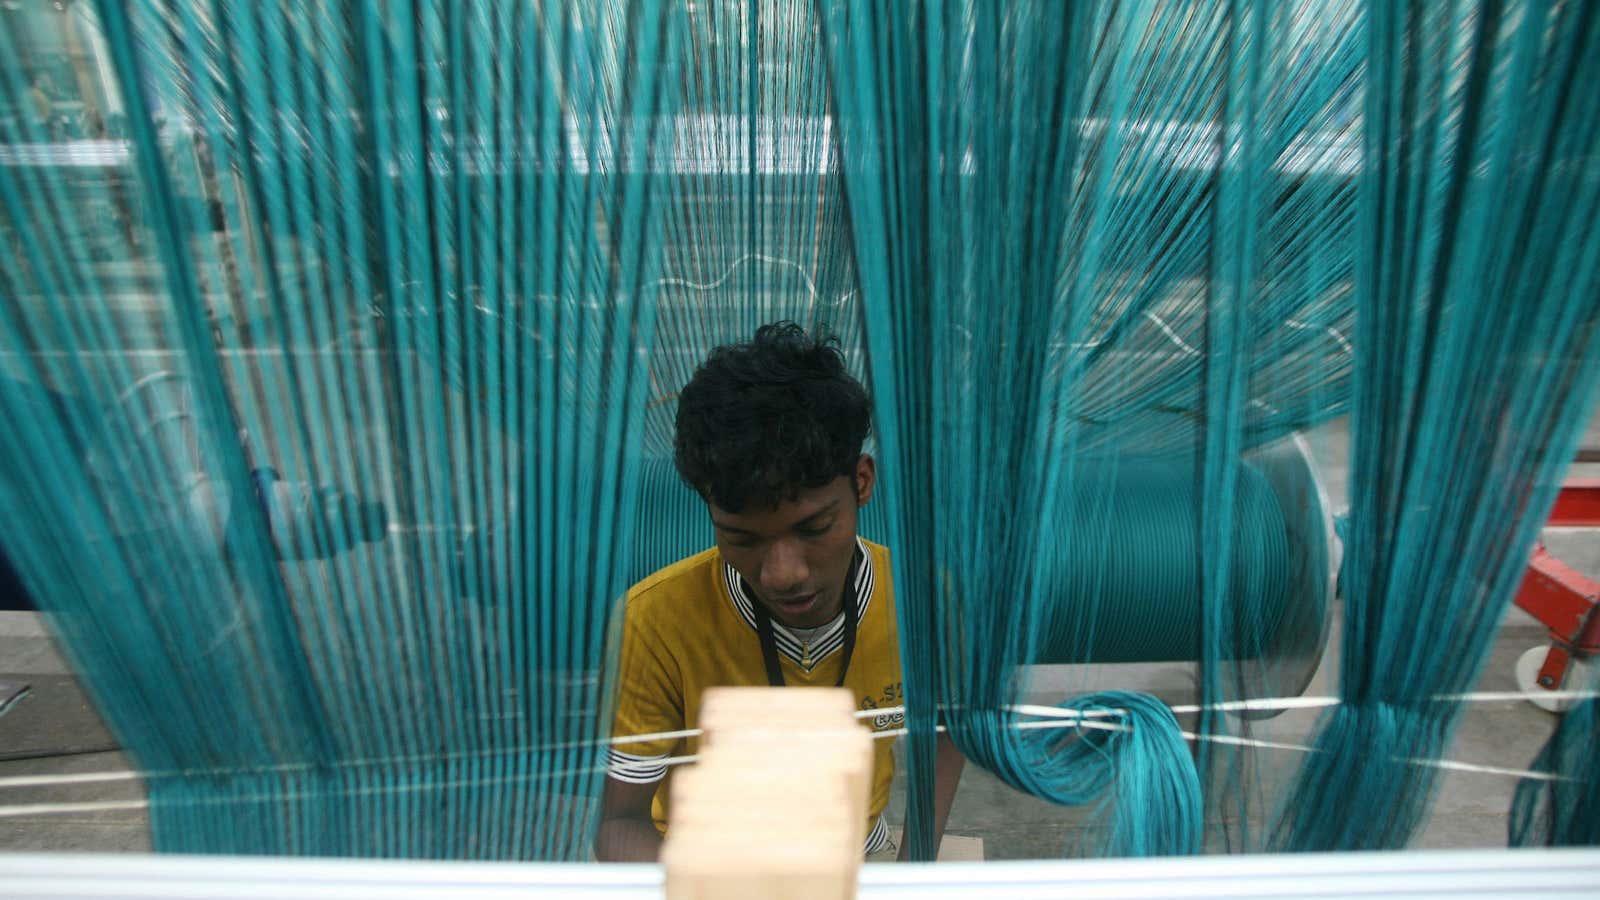 Is a new day for India’s garment industry looming?